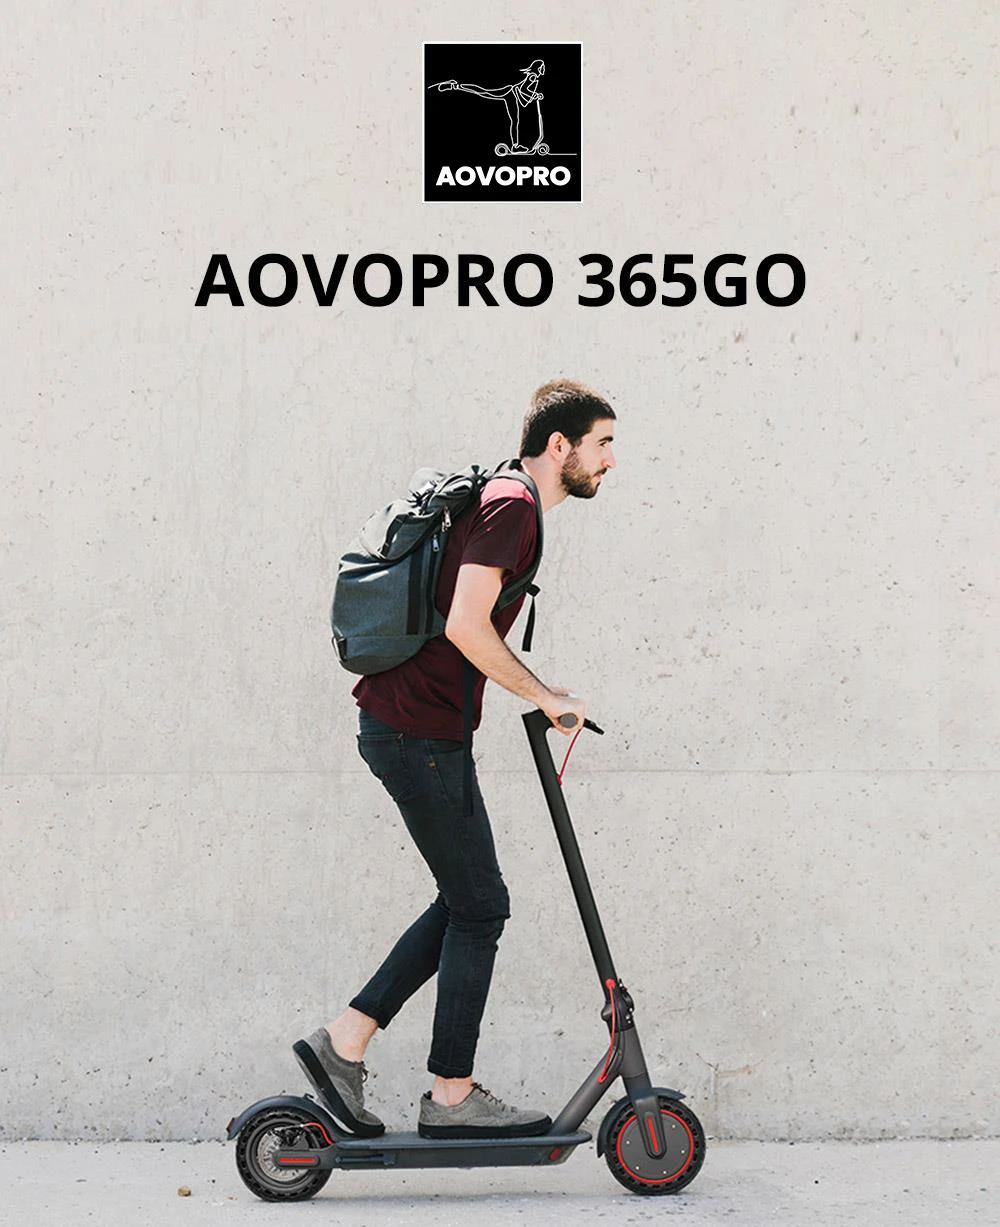 AOVOPRO 365GO Electric Scooter 8.5 Inch Anti-Skid Solid Tires 350W Motor 36V 7.8Ah Battery 25Km/h Max Speed 120KG Max Load Dual Brake App Control LCD Display Waterproof Foldable E-scooter